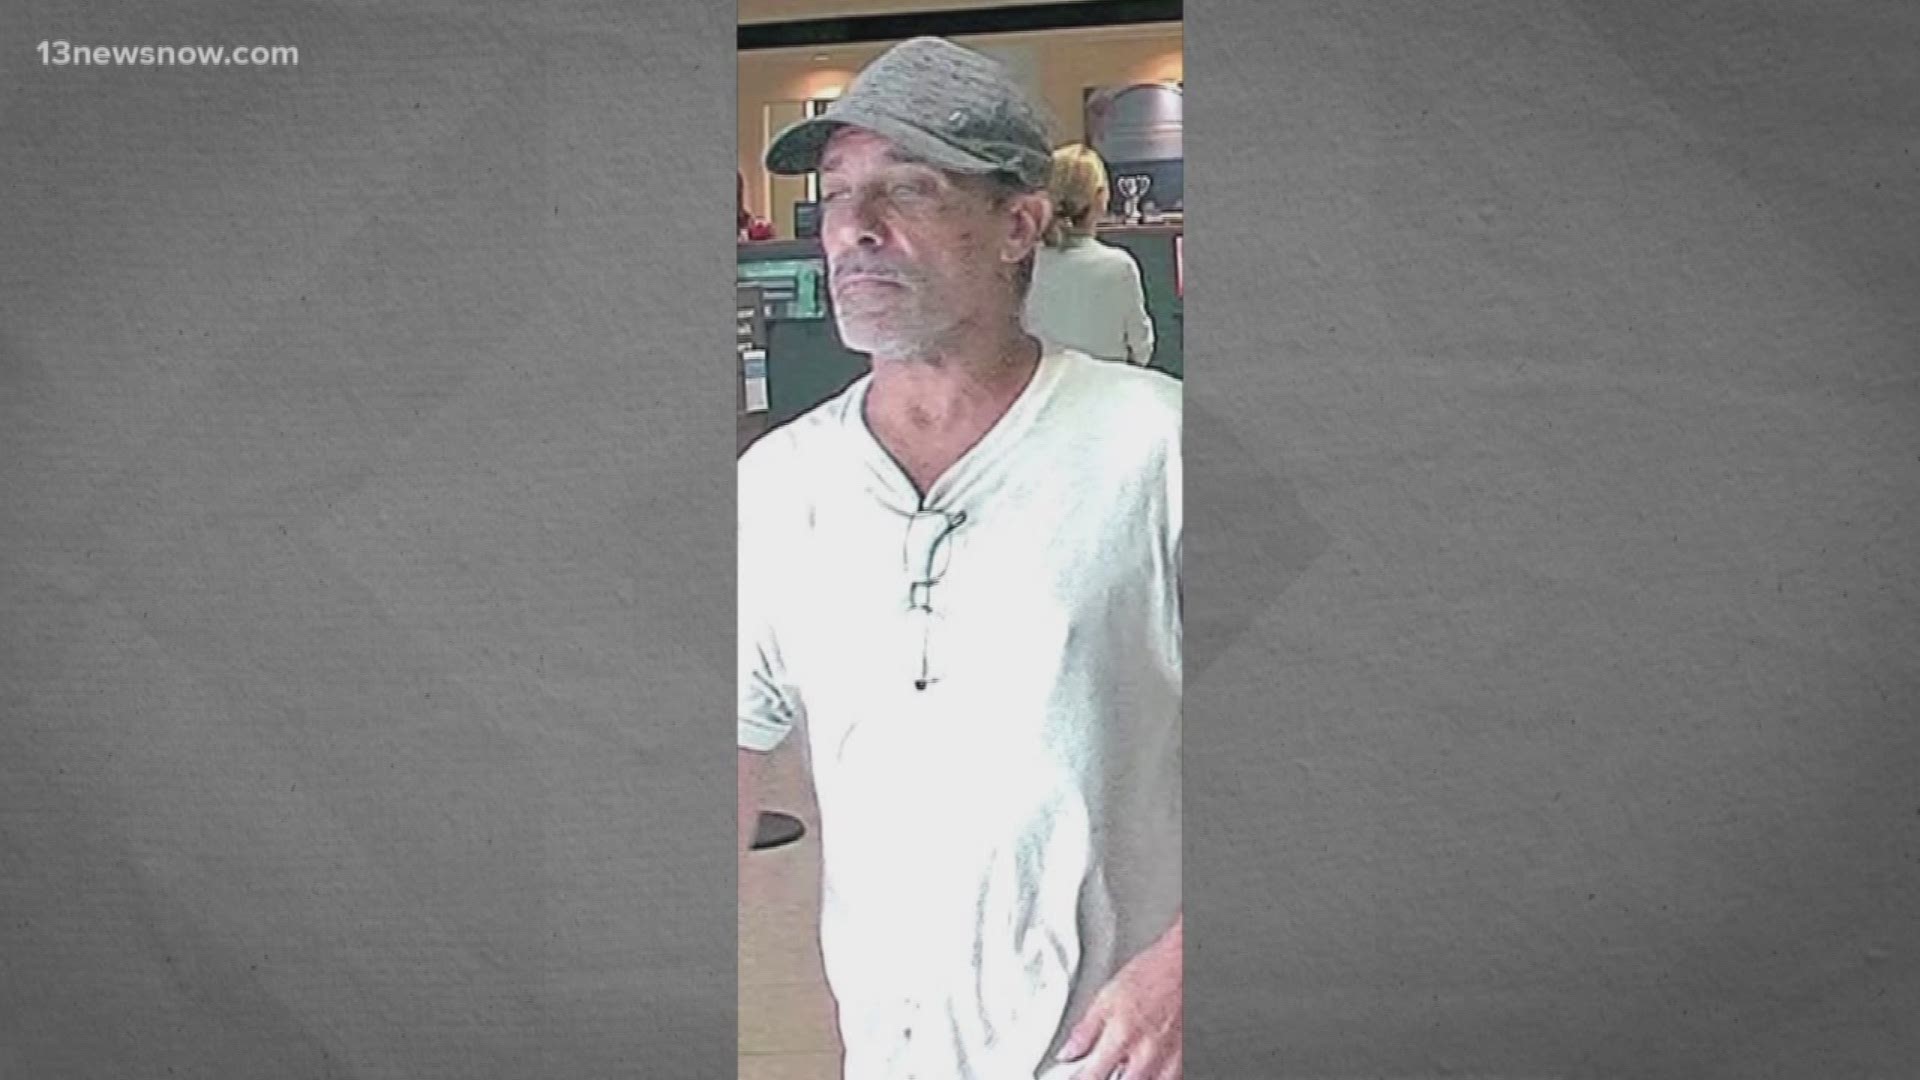 Police are trying to track down the man who robbed a bank. They said he is 5'5" and was last seen wearing a white shirt and ball cap. He also has a scruffy beard.